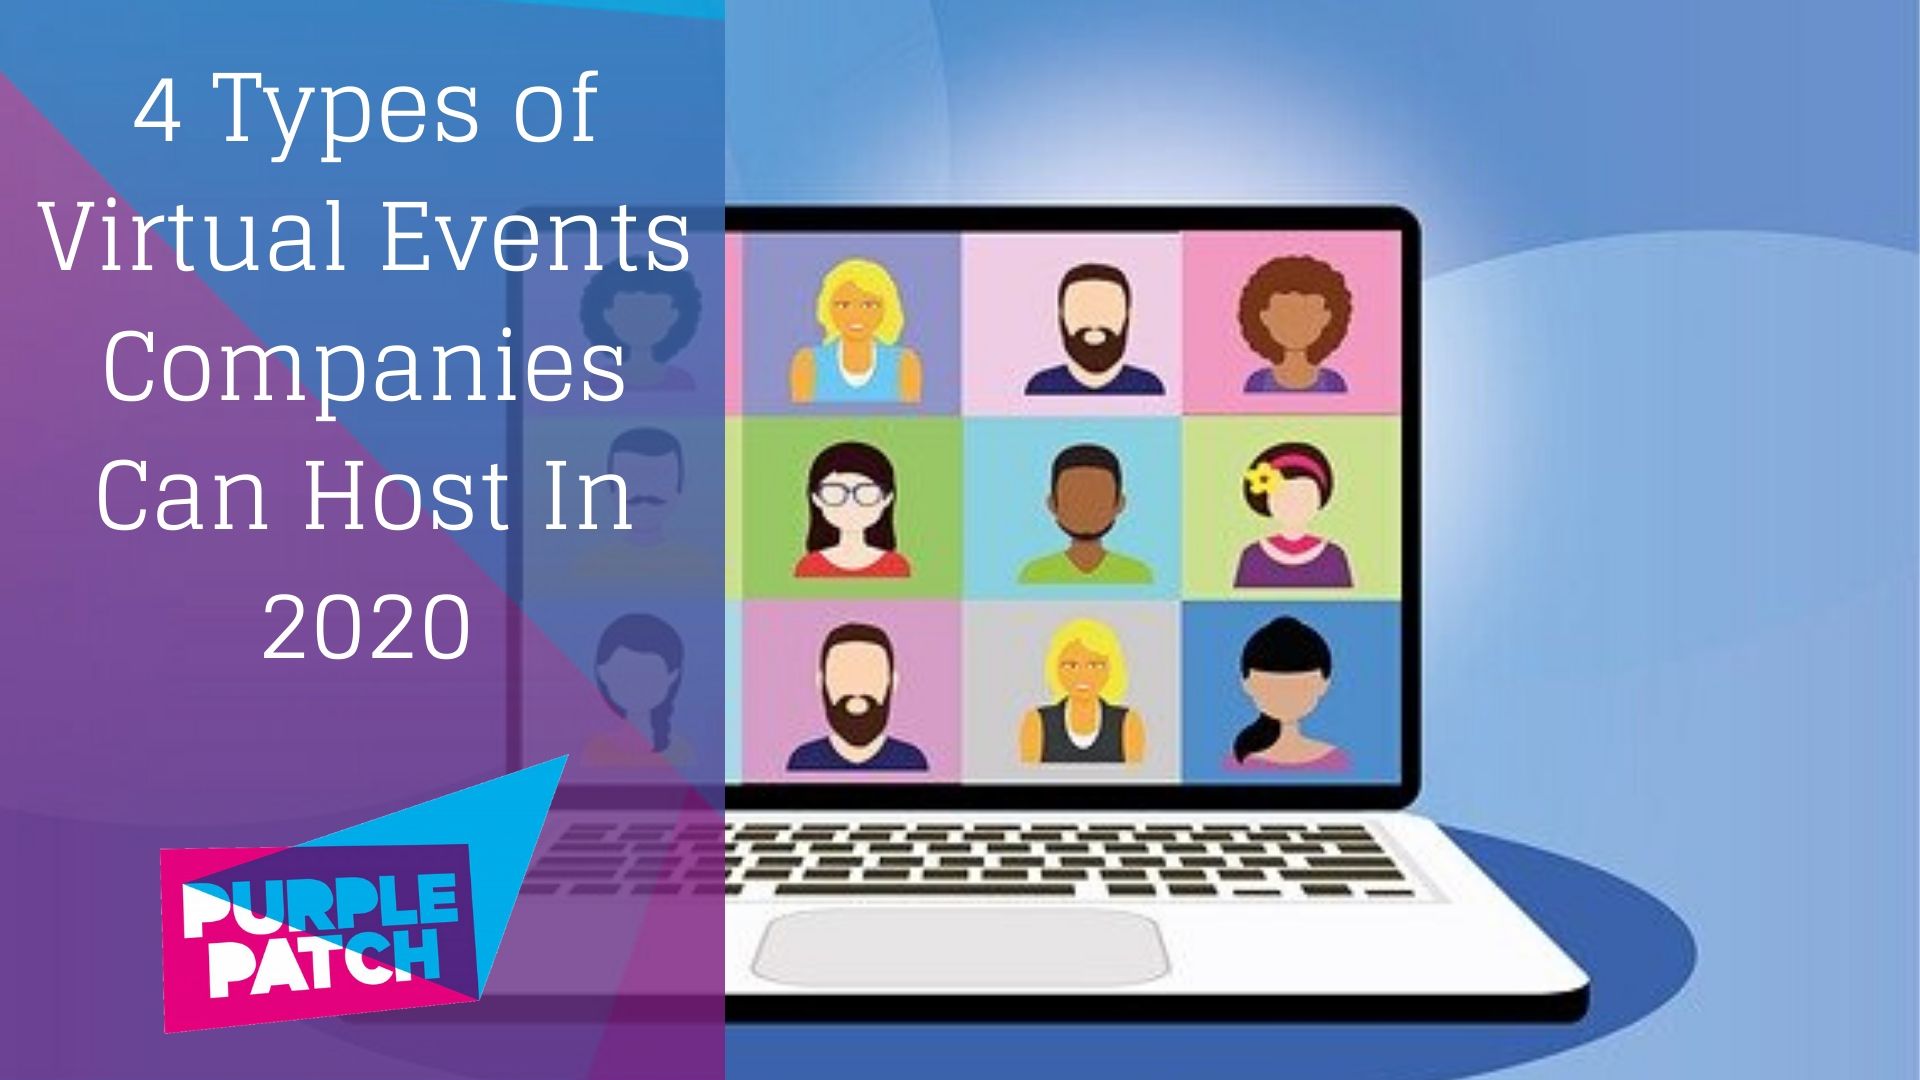 4 Types of Virtual Events Companies Can Host In 2020